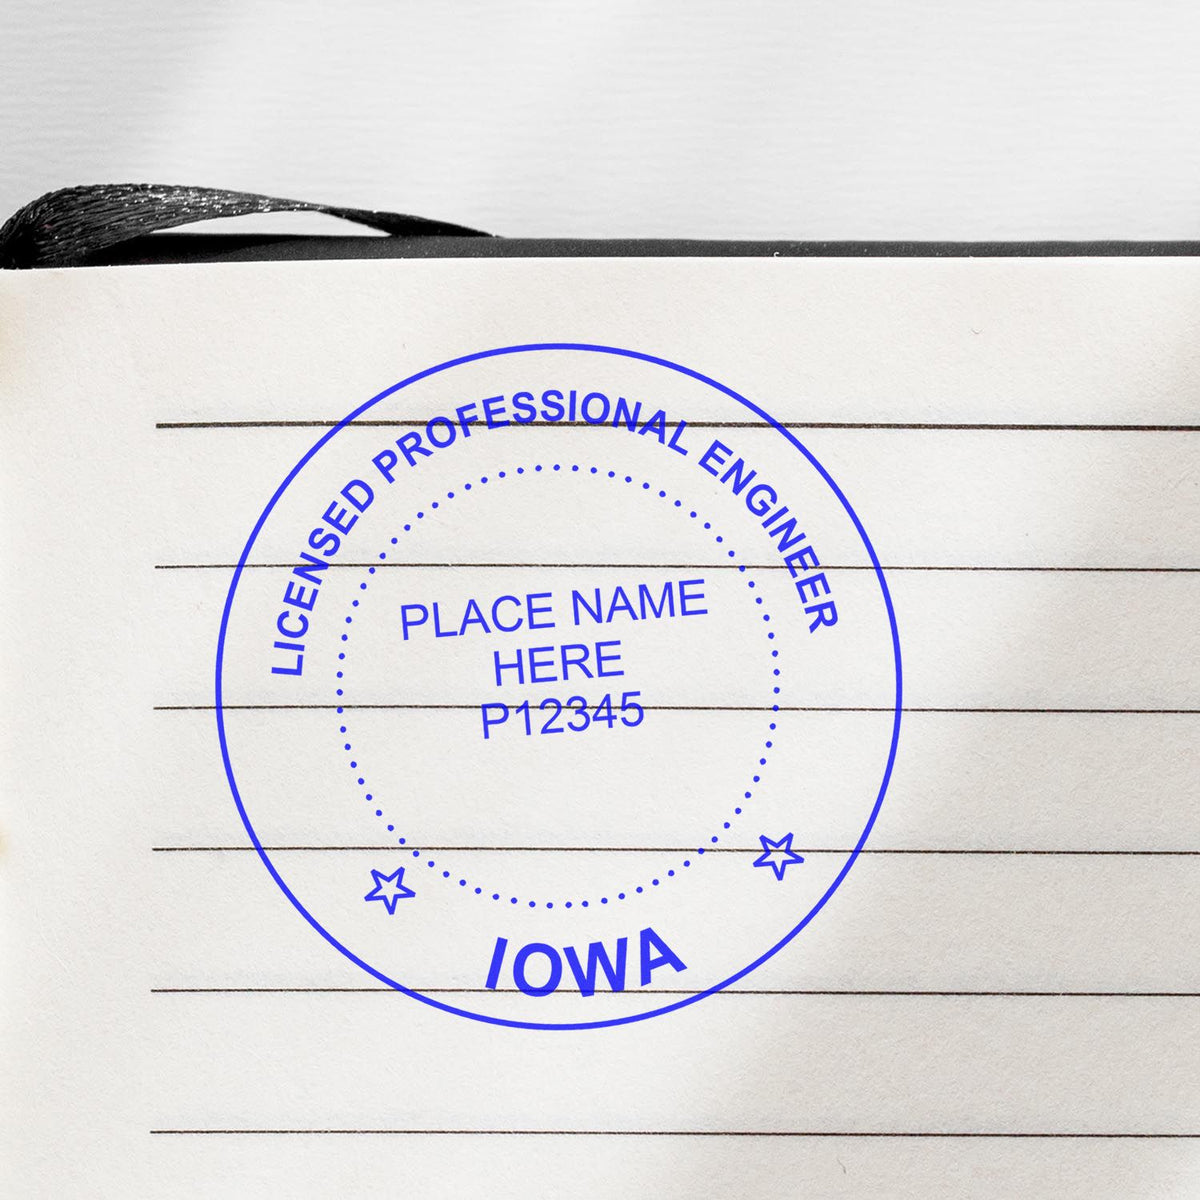 The Digital Iowa PE Stamp and Electronic Seal for Iowa Engineer stamp impression comes to life with a crisp, detailed photo on paper - showcasing true professional quality.